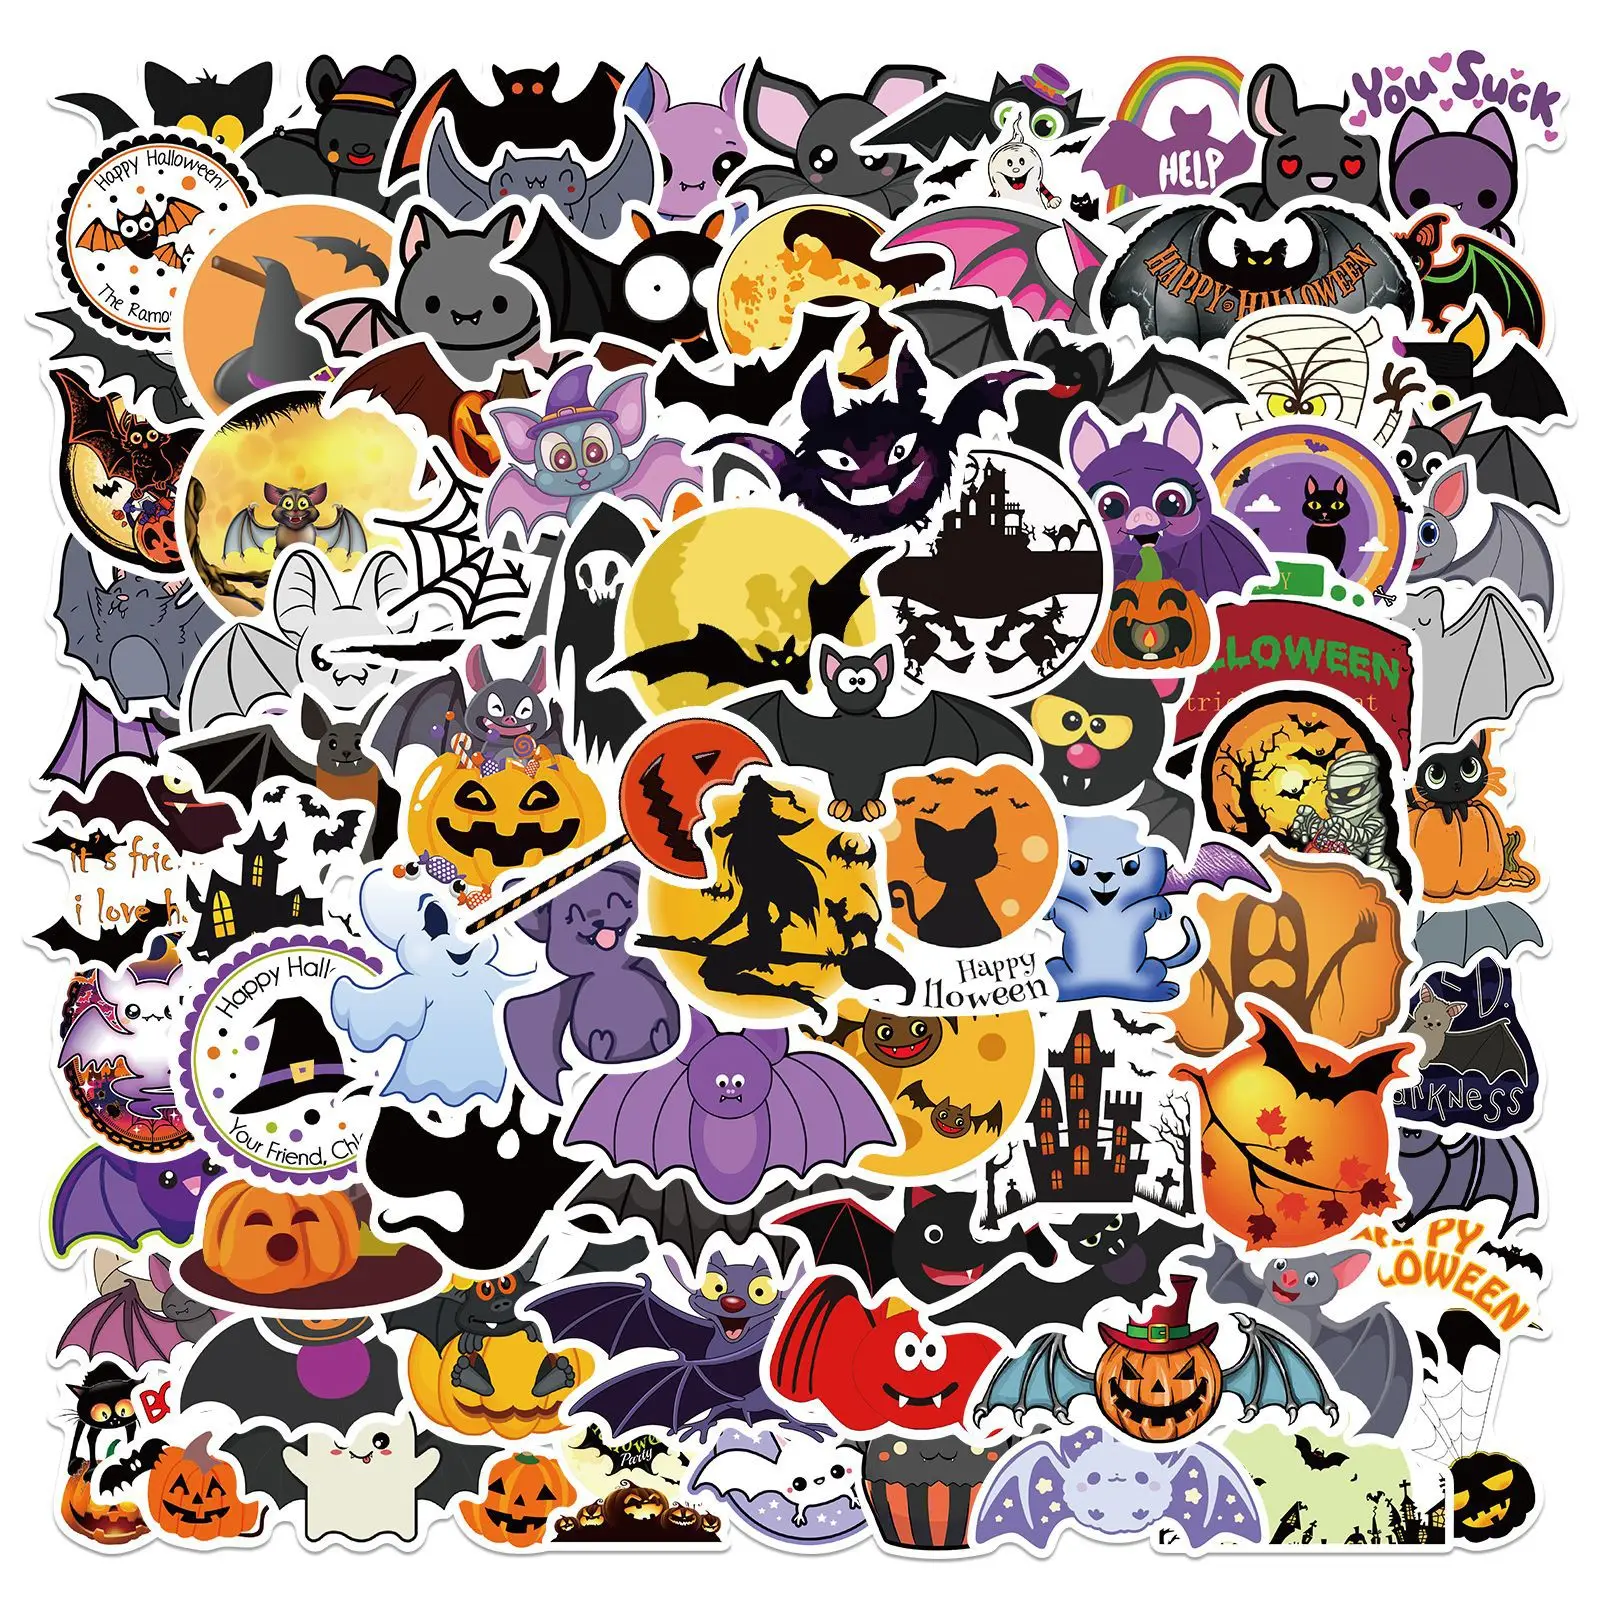 Cartoon Pumpkin Bat Halloween Wall Stickers Glass Window Sticker Halloween Decoration For Home Horror Props Party Suppiles led christmas with clip flameless lights kit party decor for window christmas tree garden 10 candles and 1